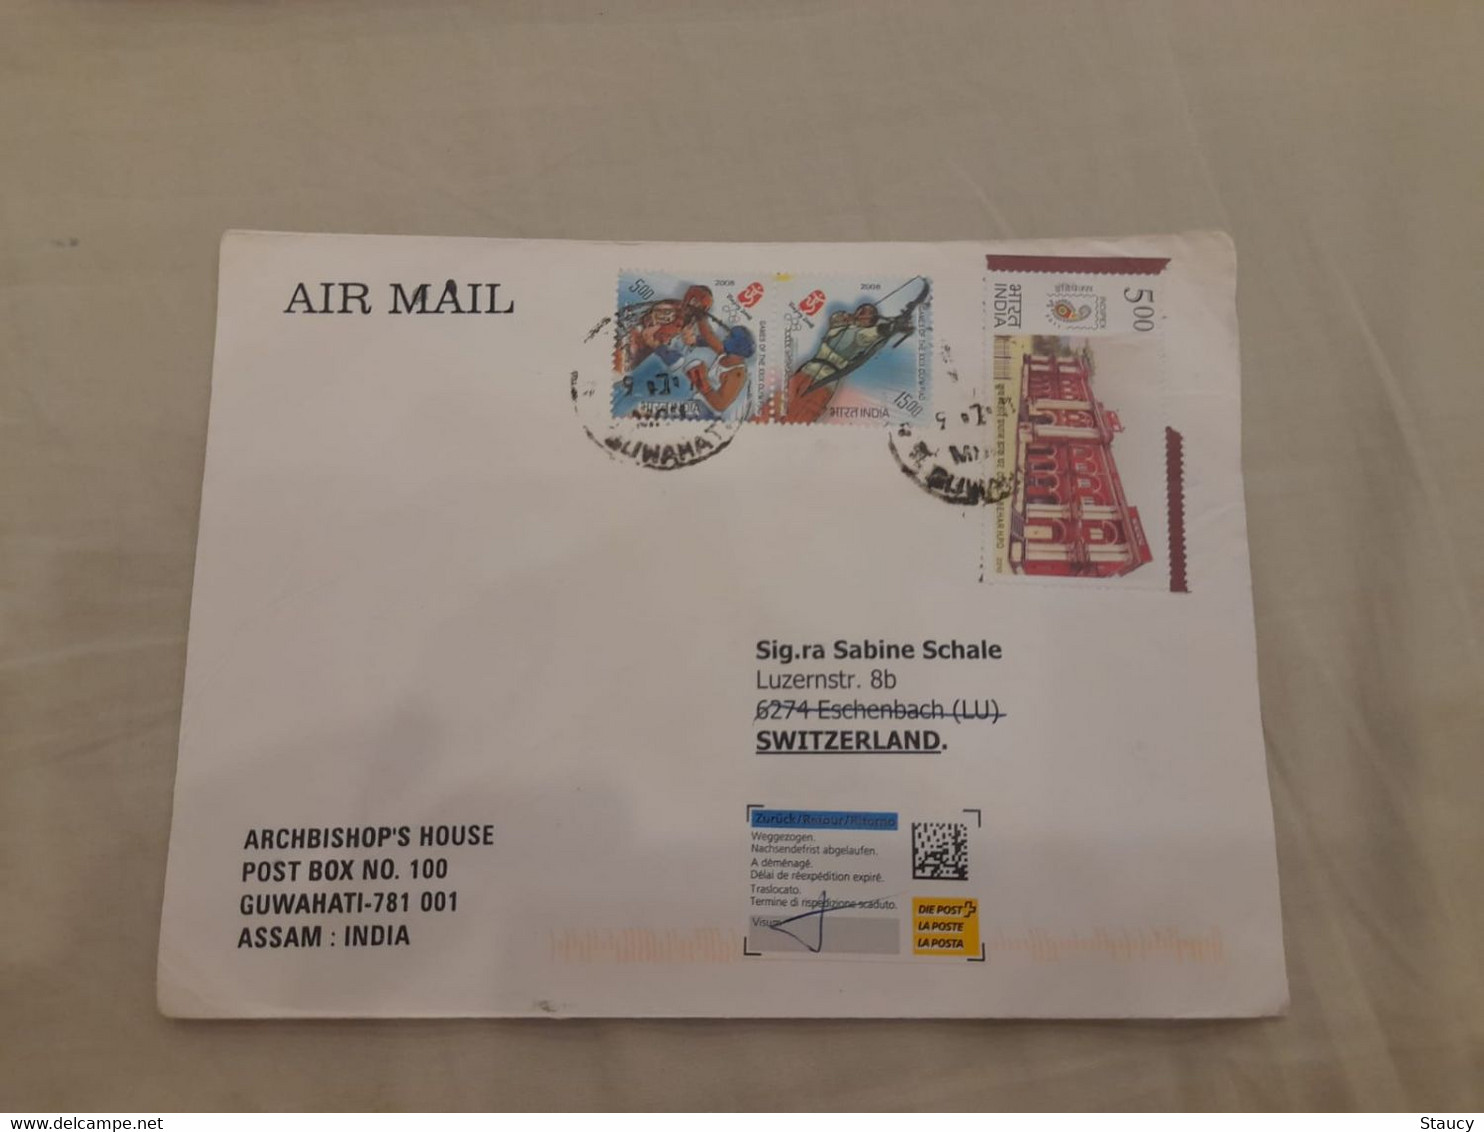 INDIA,2011,RETURN TO SENDER LABEL,AIR MAIL COVER TO SWITZERLAND,3 STAMPS,OLYMPIAD, POSTAL HERITAGE, GUWAHATI - Poste Aérienne